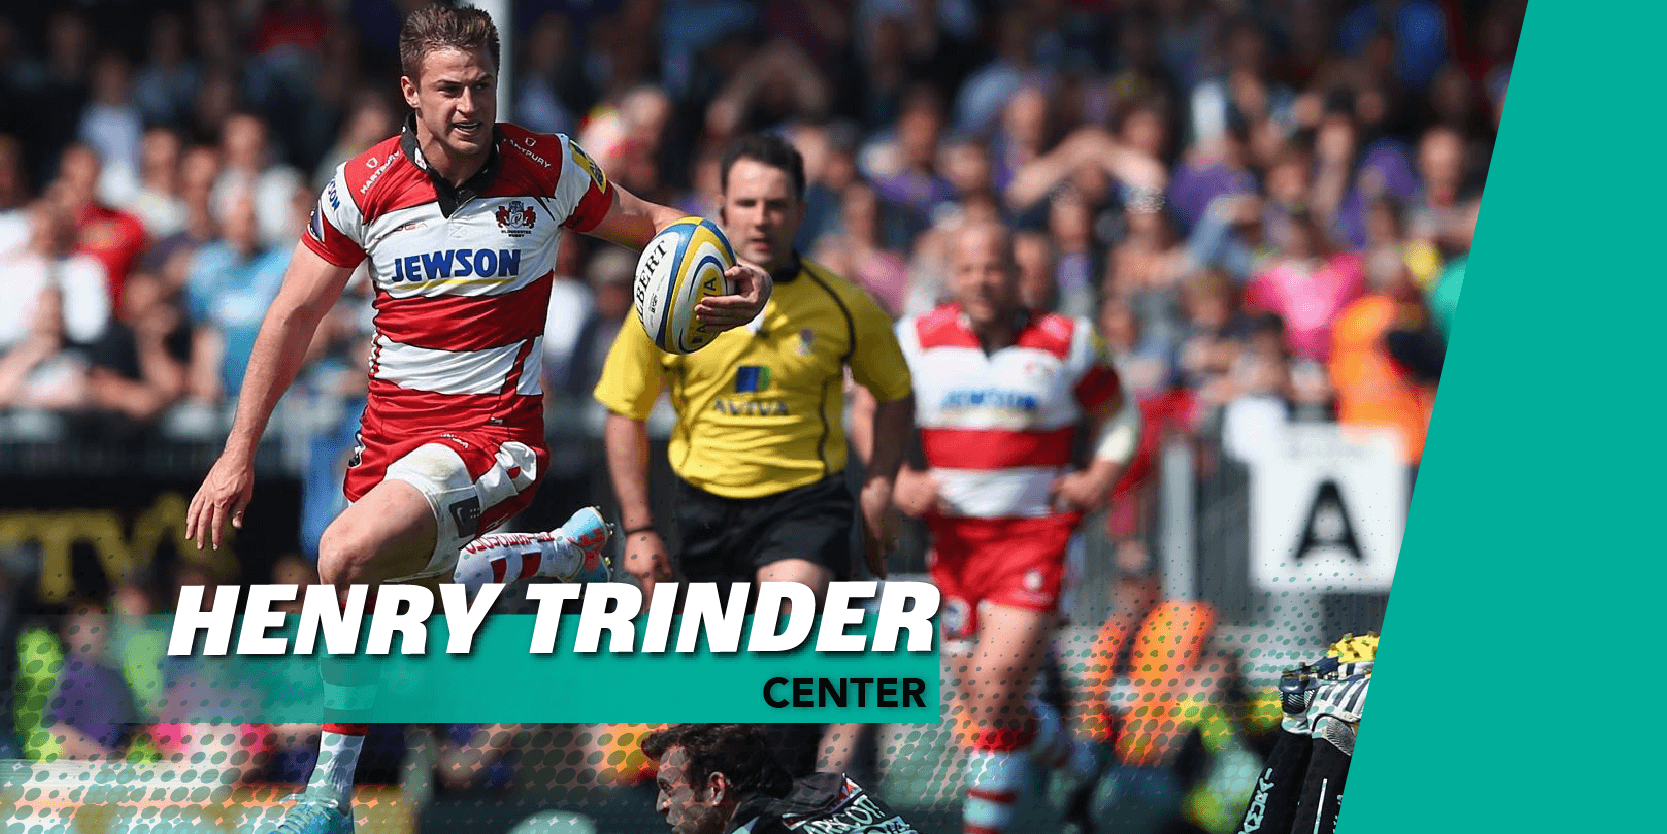 Former Gloucester Rugby Henry Trinder Comes To Dallas